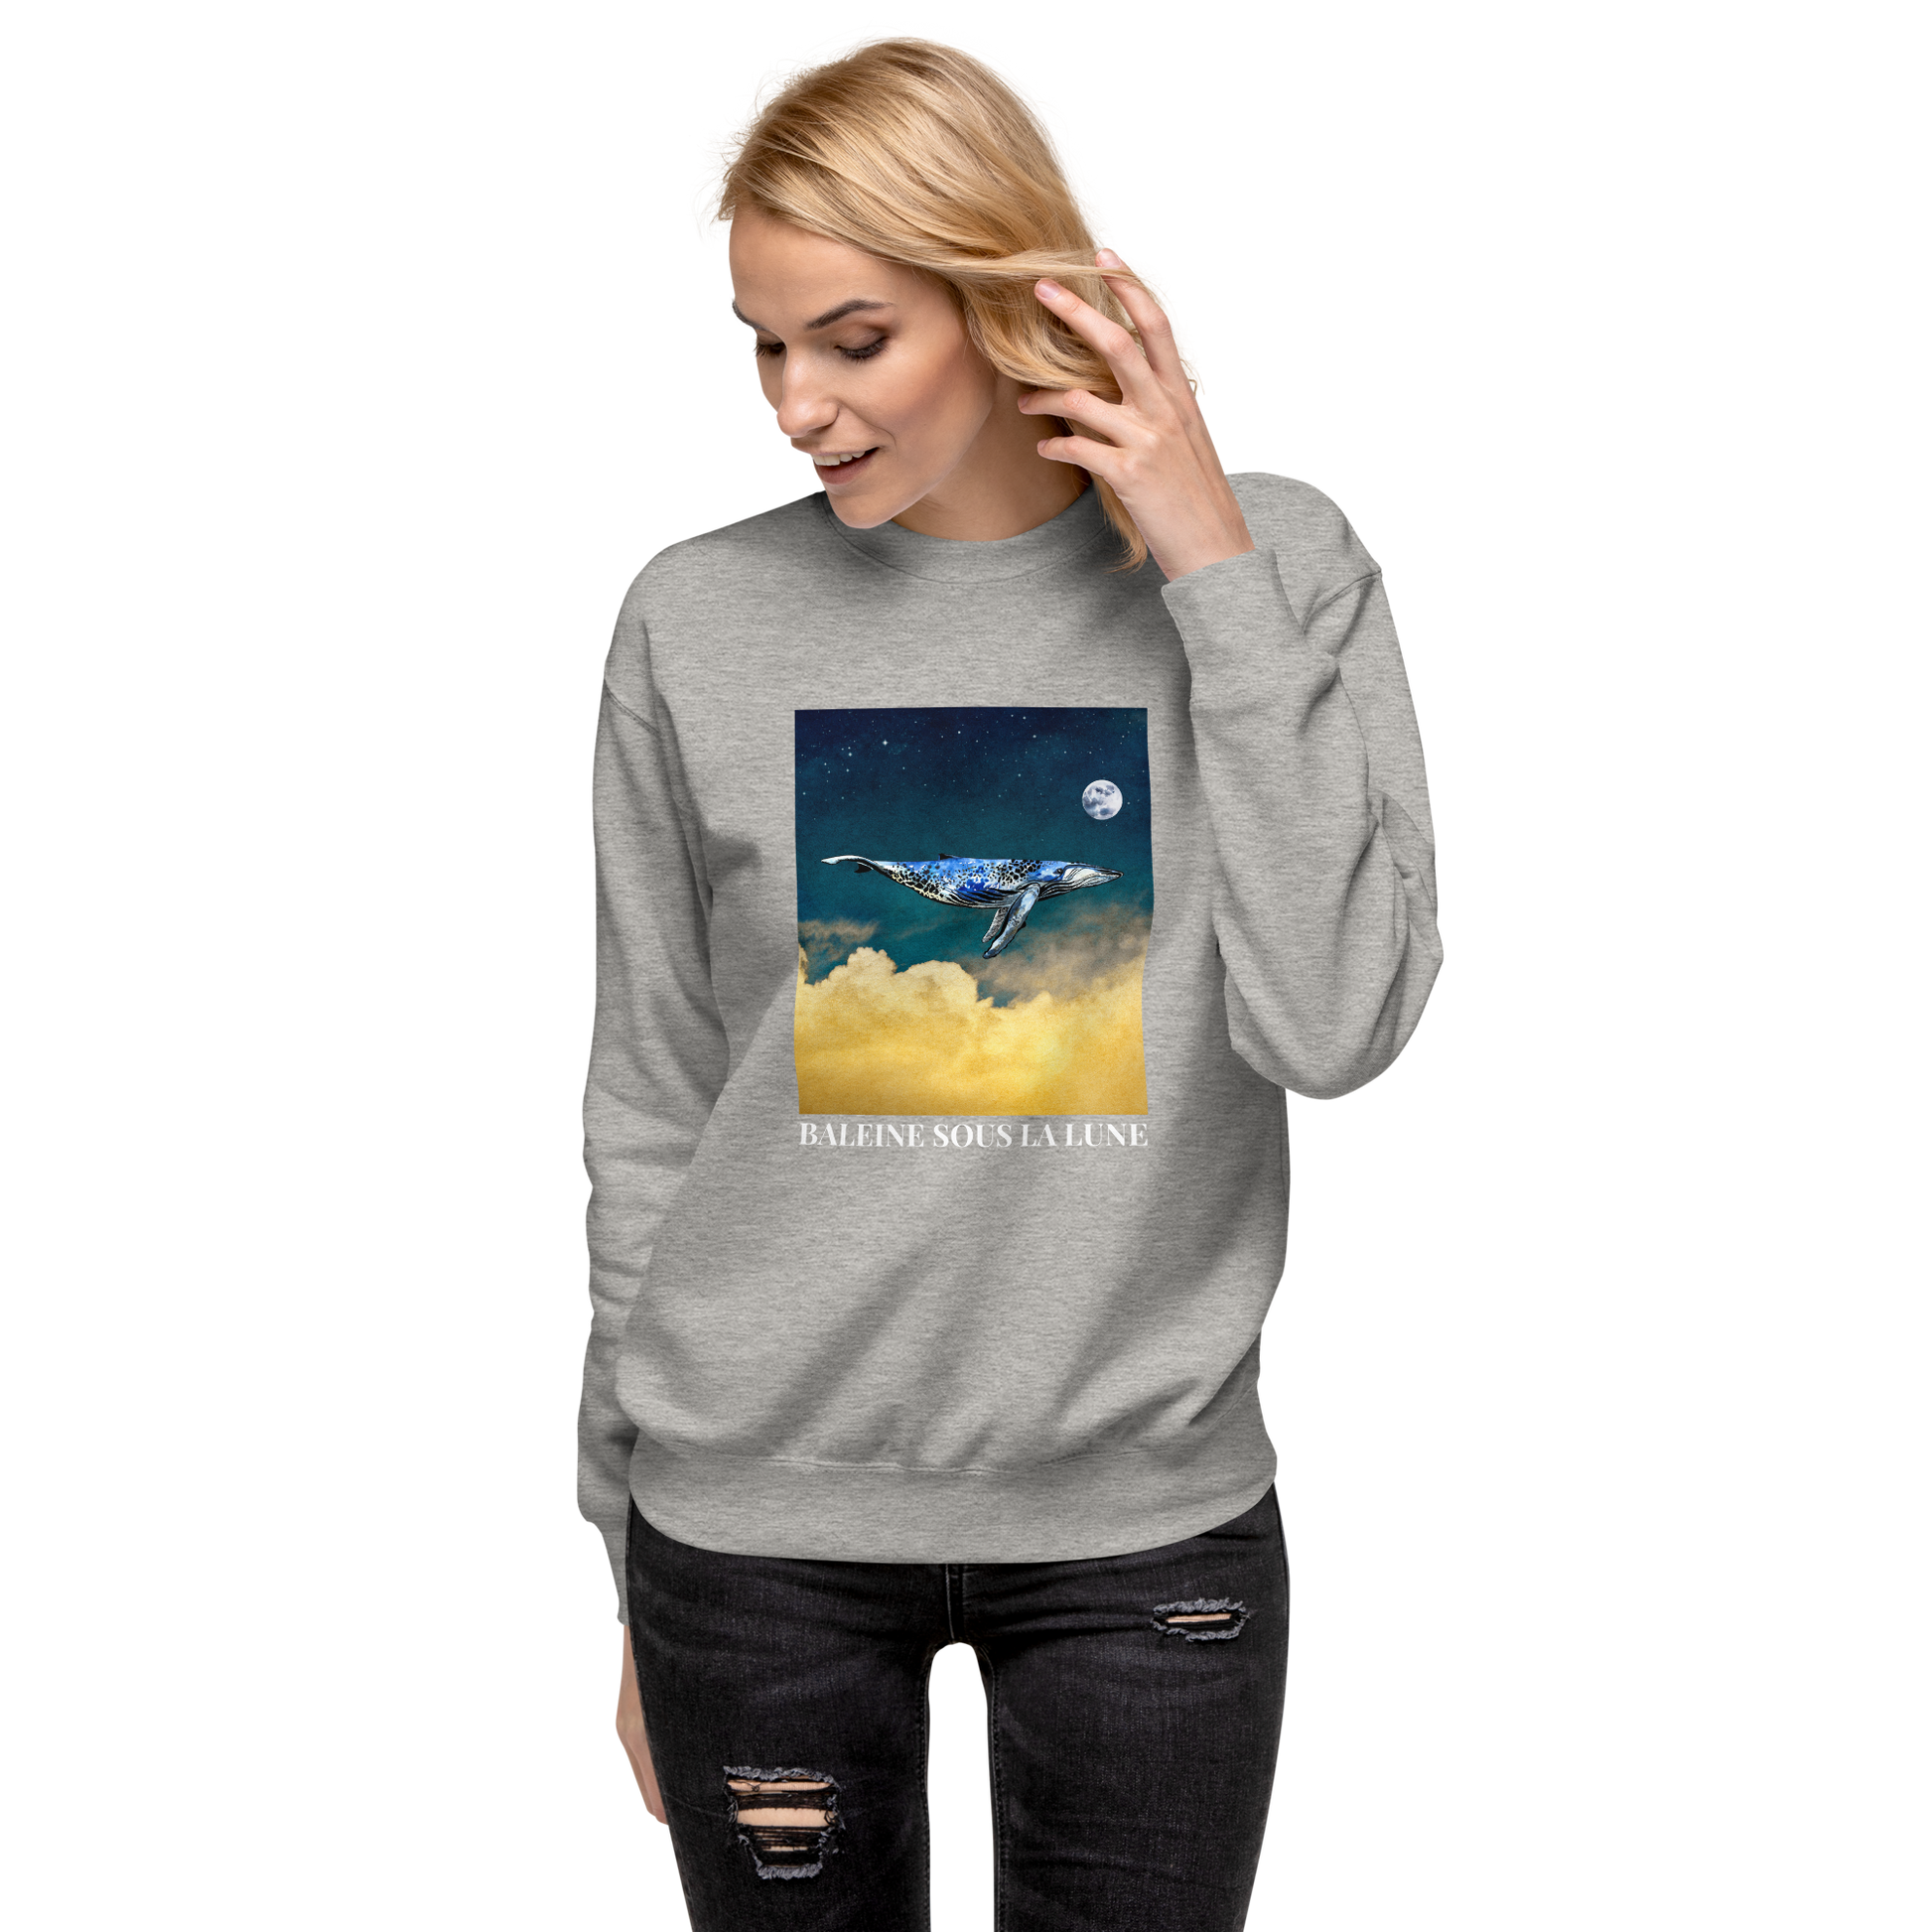 Woman wearing a Carbon Grey Premium Whale Sweatshirt featuring a majestic Whale Under The Moon graphic on the chest - Cool Graphic Whale Sweatshirts - Boozy Fox